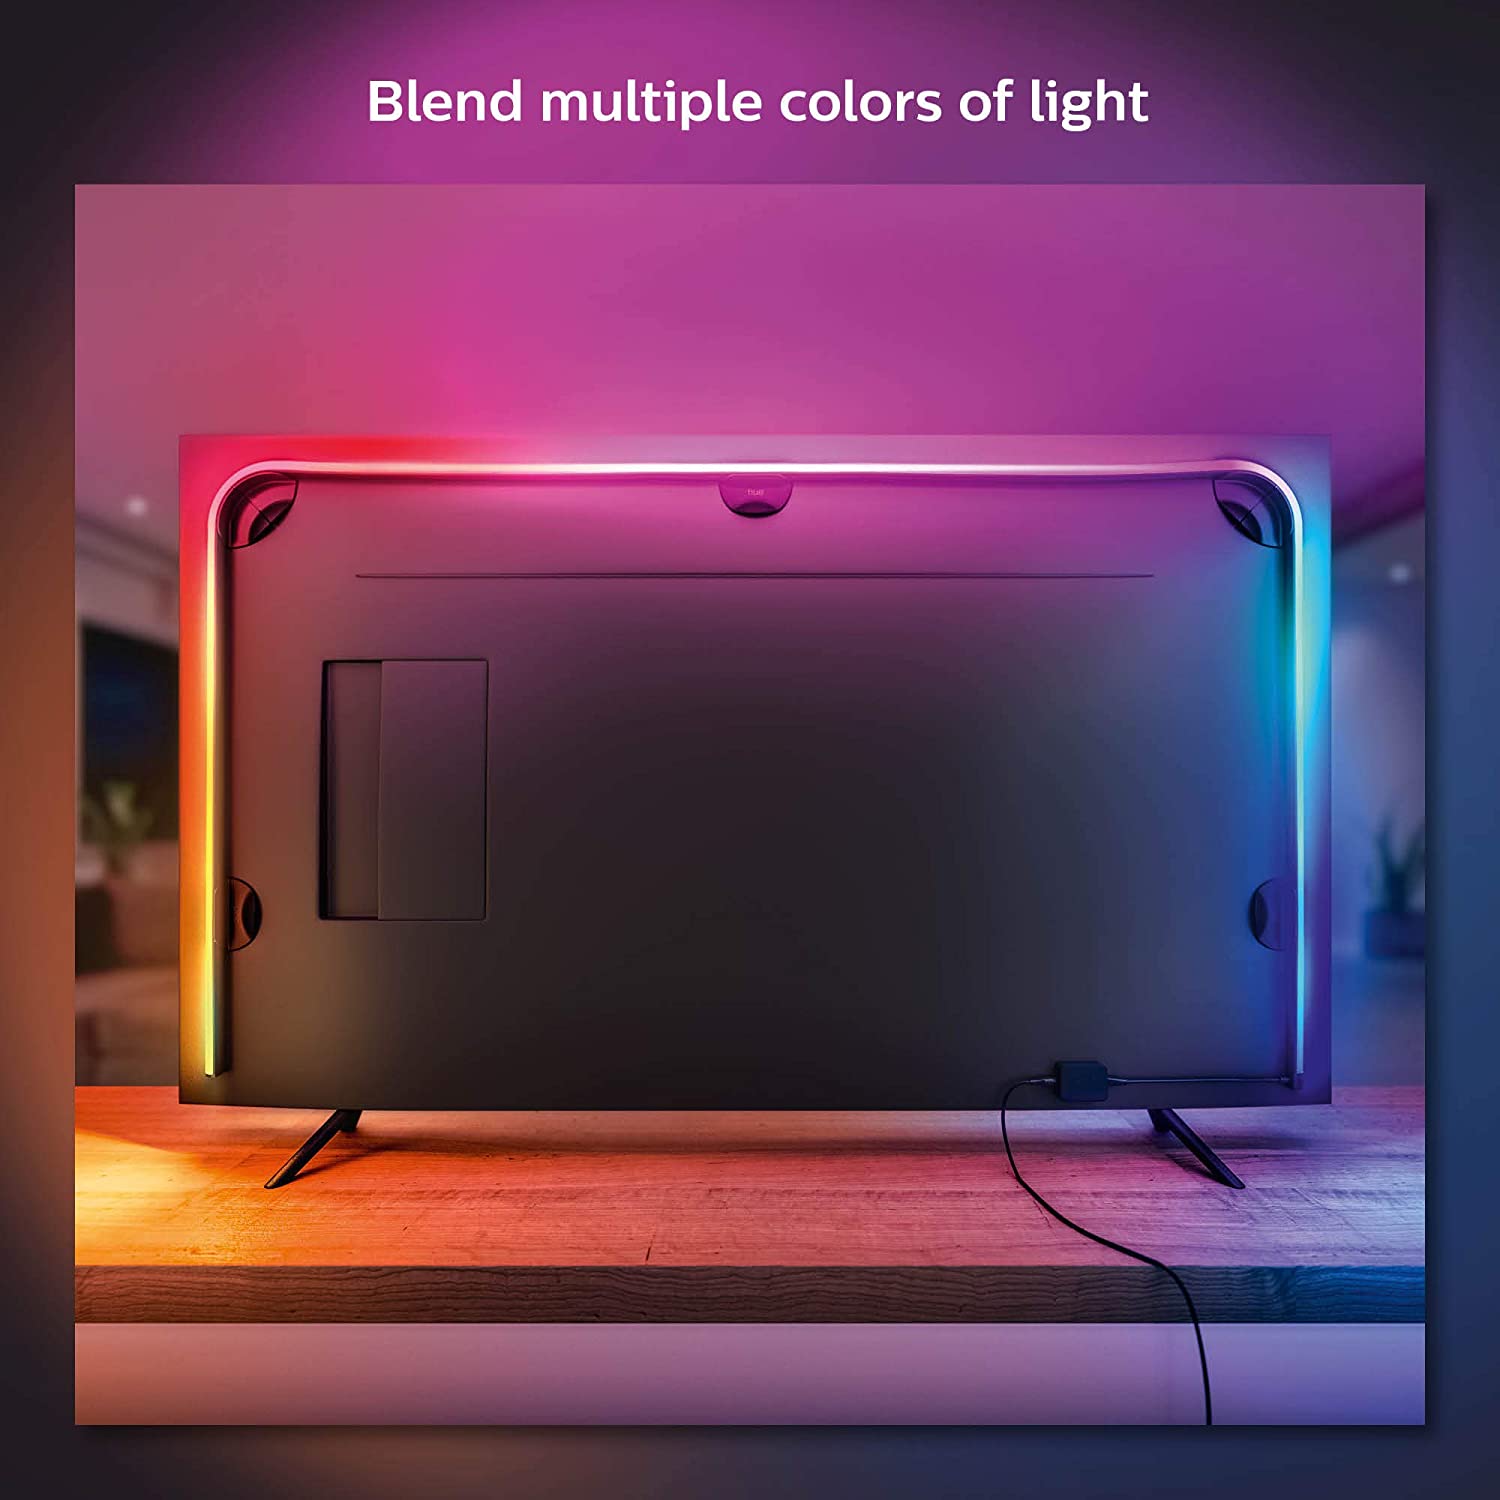 LED Philips Hue Gradient Lightstrips Spotted at 29% Discount Ahead of Independence Day Sale